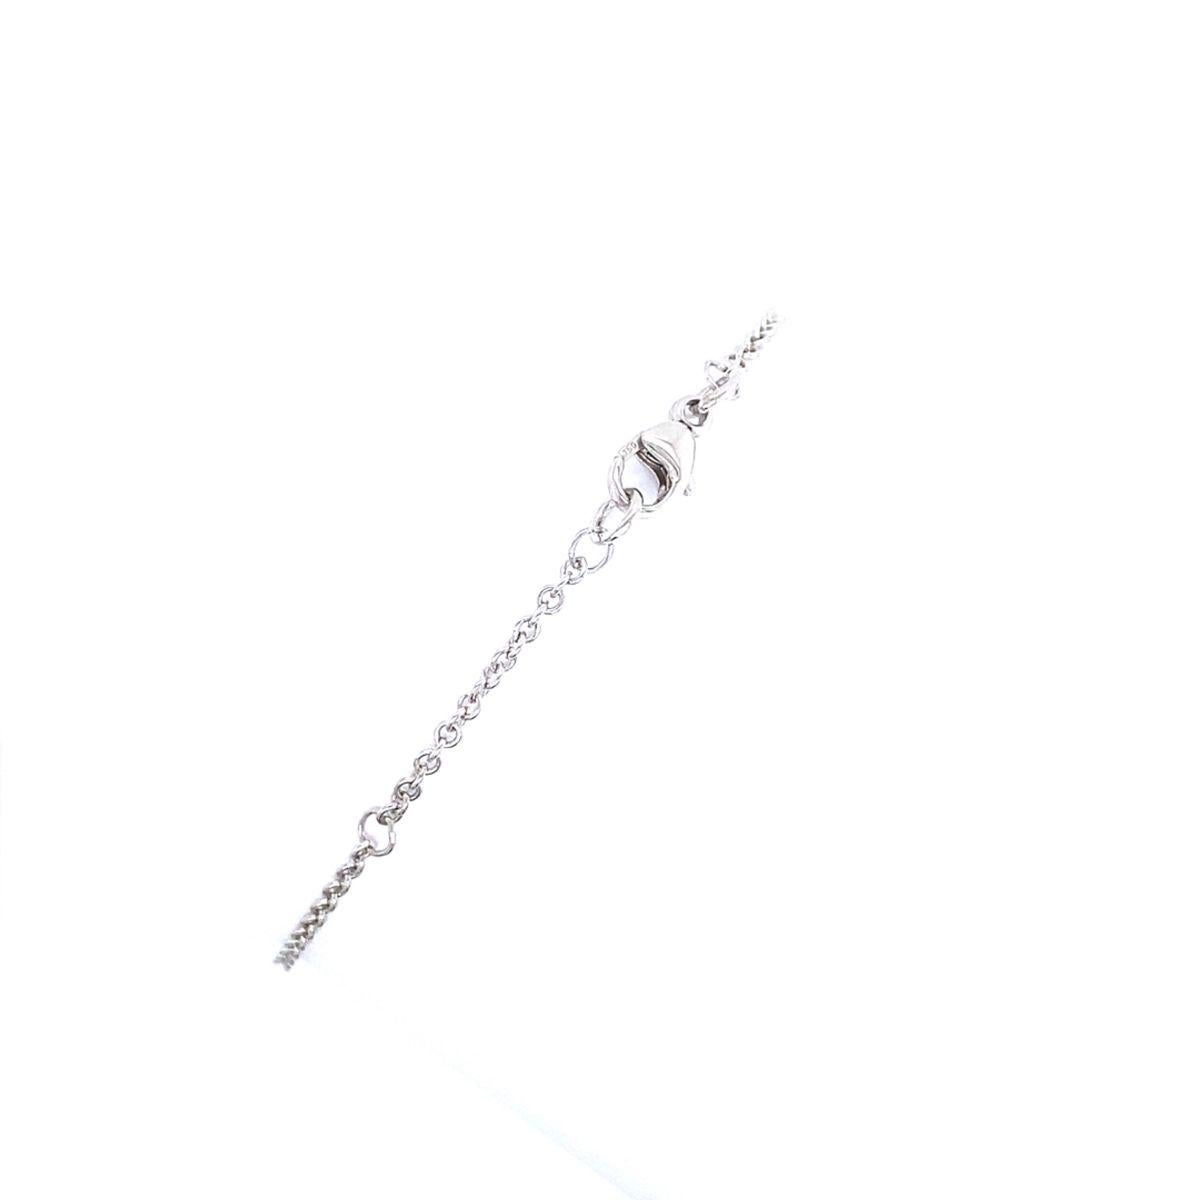 18ct White Gold Tennis/Chain Bracelet, Set With 4 Round Brilliant Cut Diamonds

Additional Information:
Total Diamond Weight: 0.36ct
Diamond Colour: G/H
Diamond Clarity: SI1
Total Weight: 2.5g
Diamond Head Size: L 11.6mm x W 2.9mm
SMS4938
